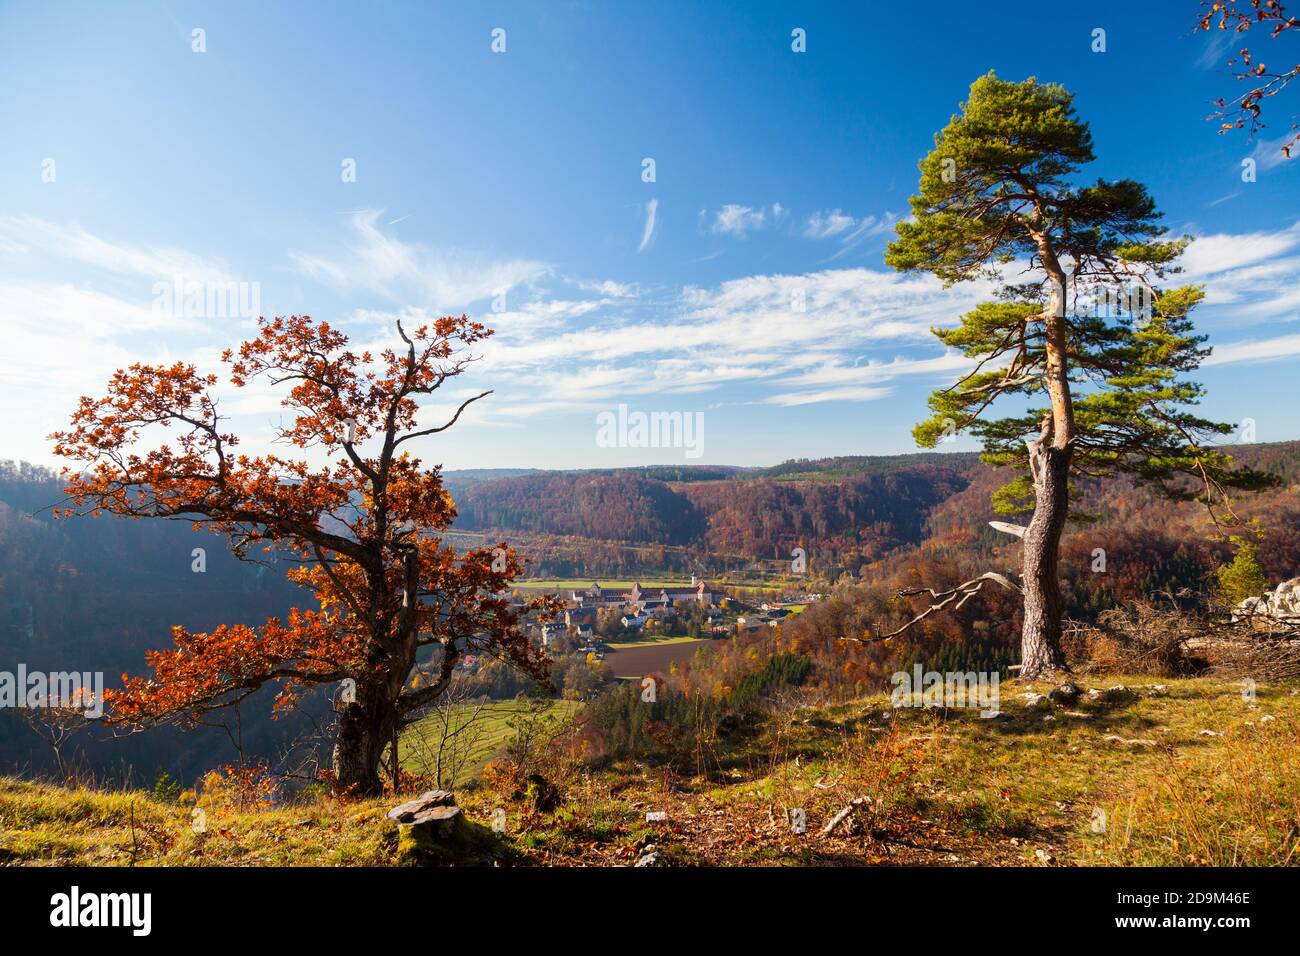 Beuron in upper Danube valley, Germany Stock Photo